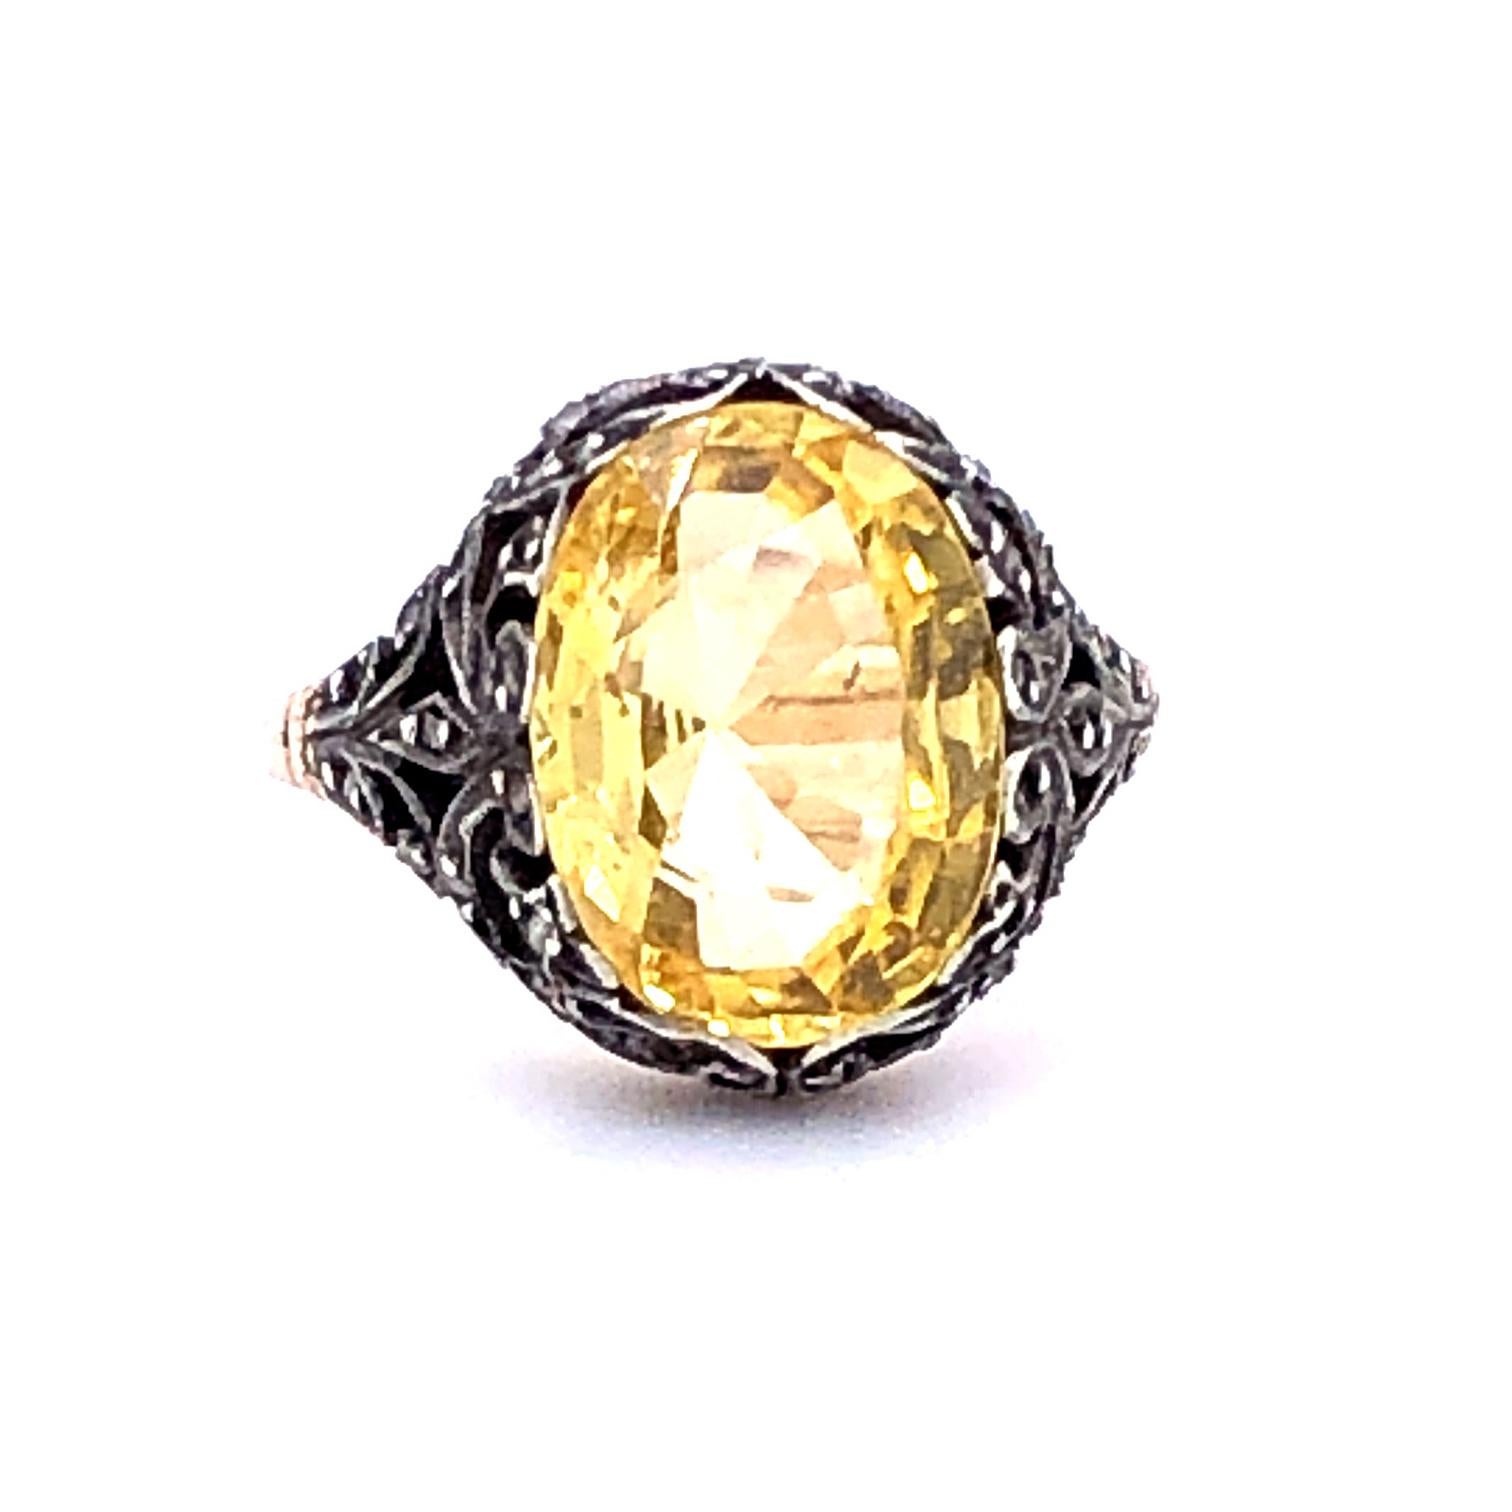 An intricate Victorian Natural Yellow Sapphire Ring, ca. 1880s, set with a bright yellow unheated yellow sapphire of ca. 4.8 carats. The sapphire is set within a very detailed floral metal cluster.

Ring size 4, can be altered complimentary upon